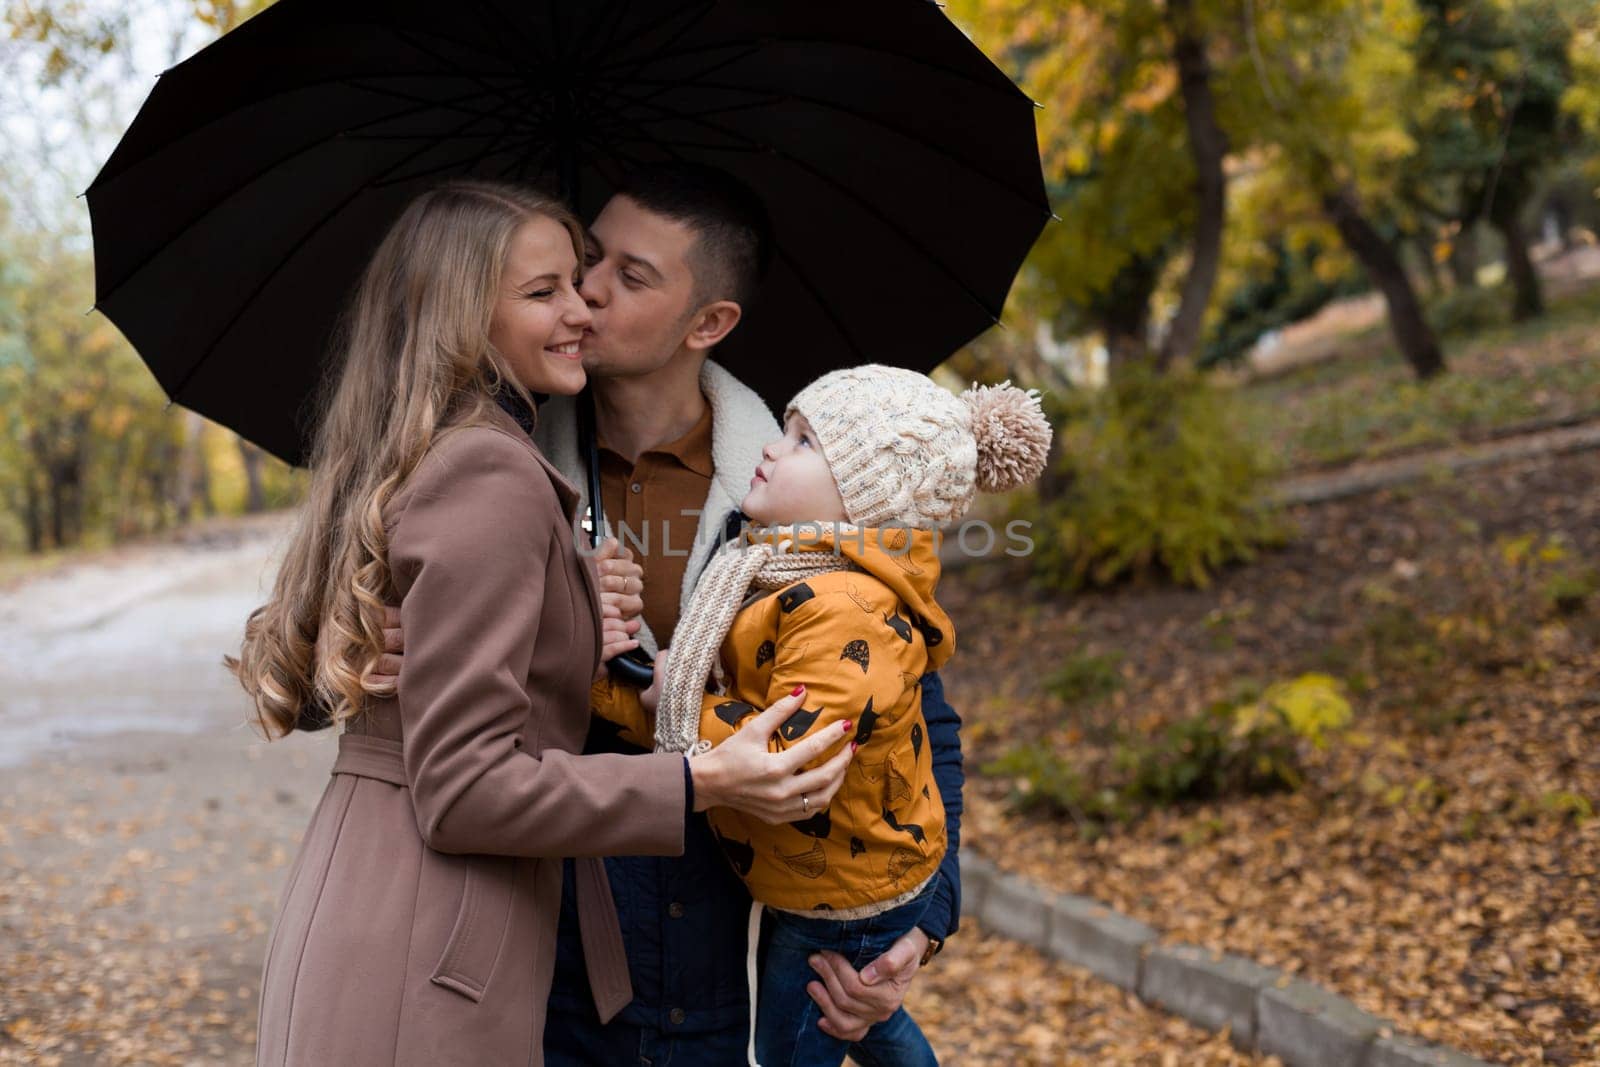 with his son's family in autumn in Park forest rain umbrella